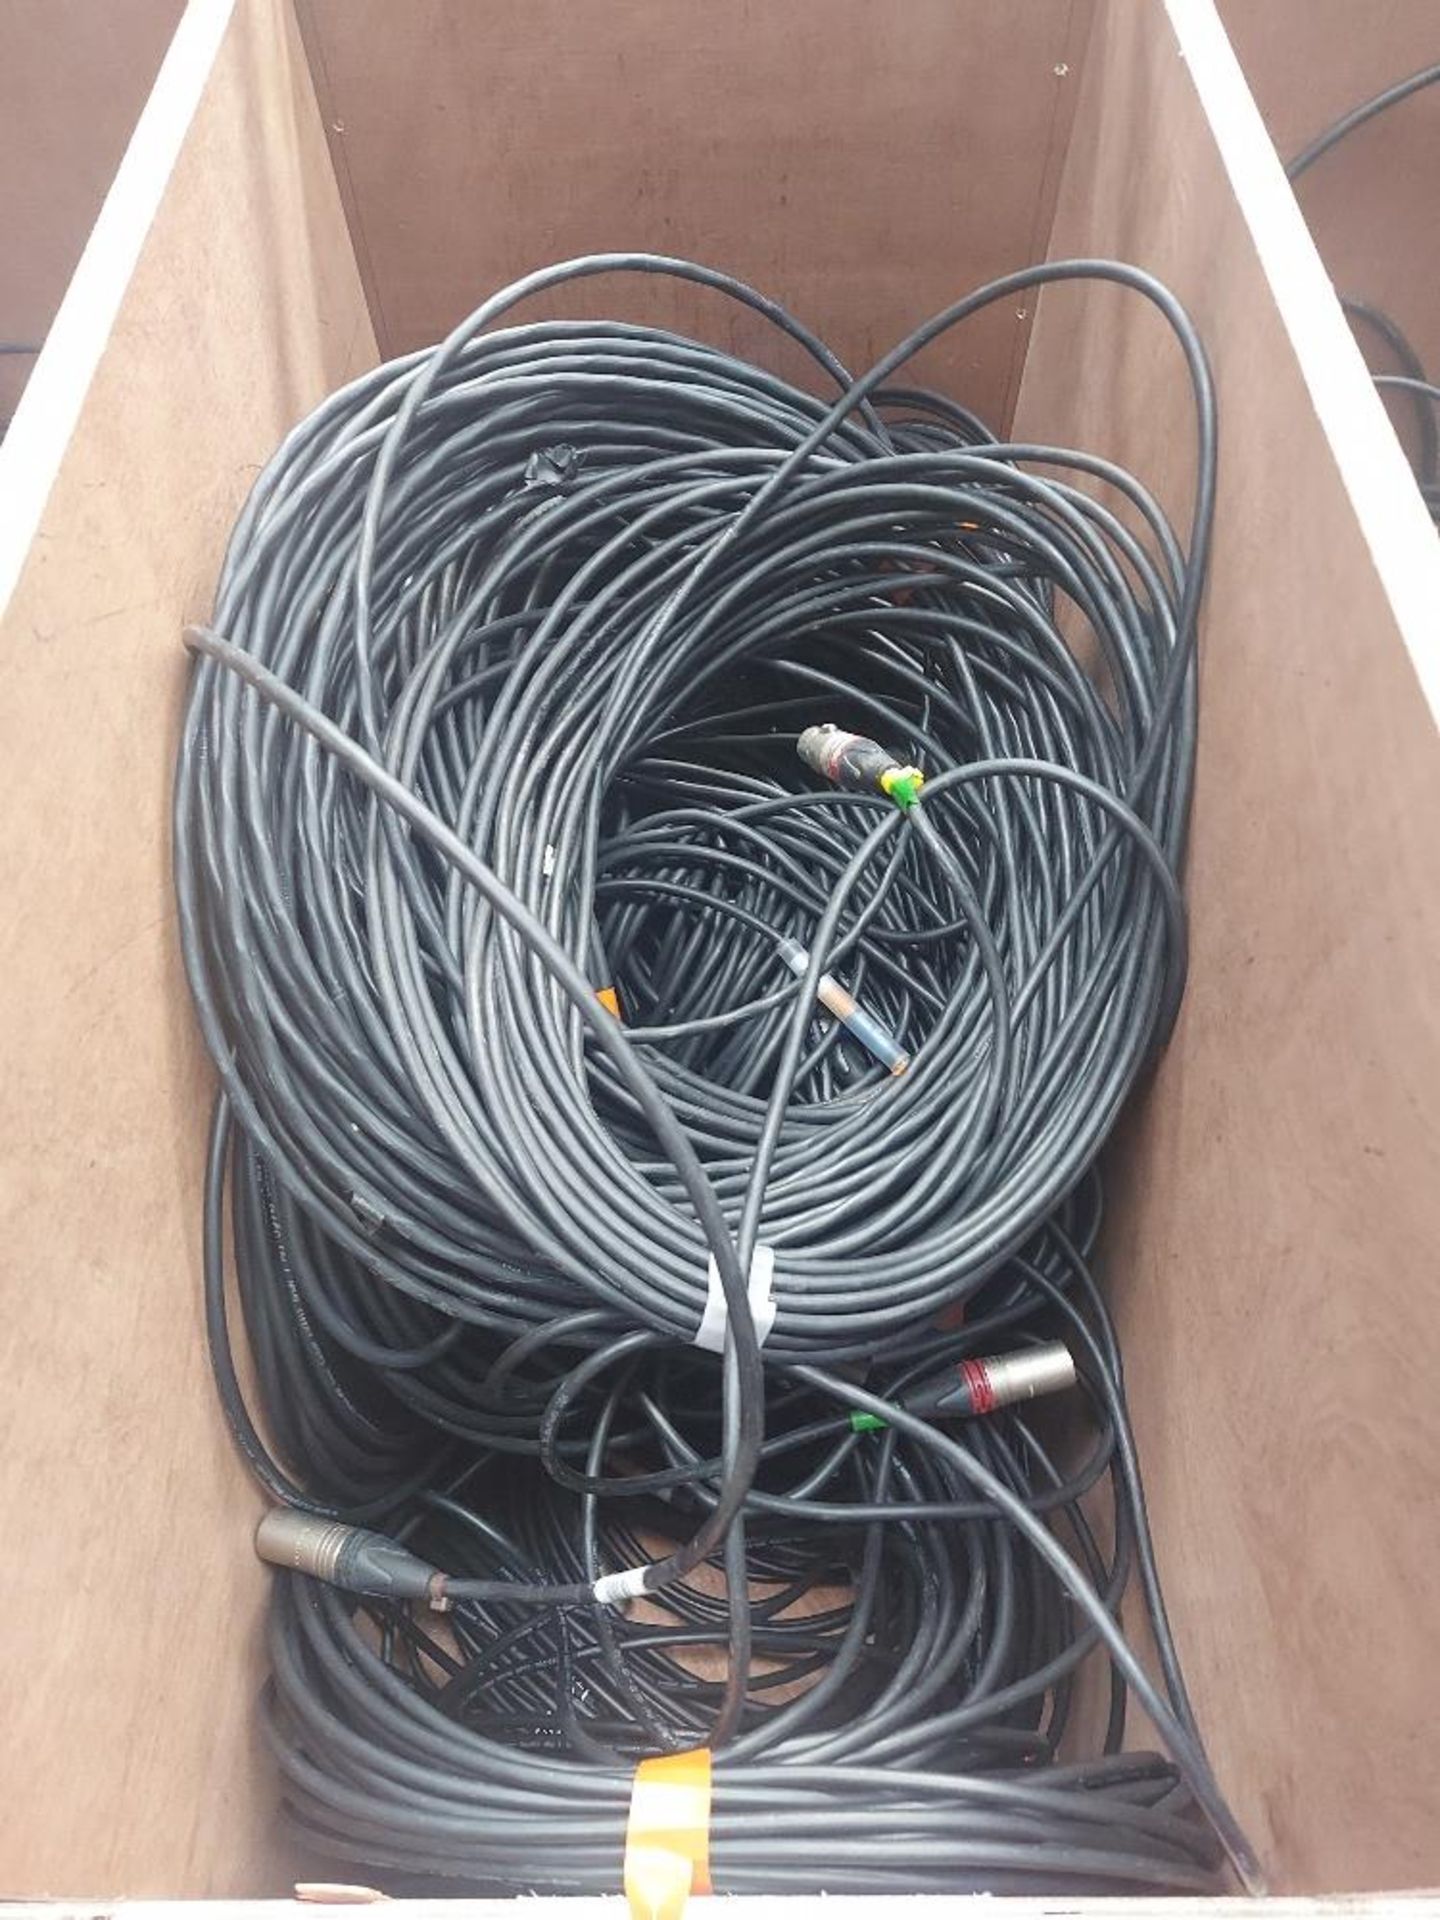 Large Quantity of 50m 5-Pin DMX Cable M-F & 30m 5-Pin DMX Cable M-F with Steel Fabricated Stillage - Image 4 of 6